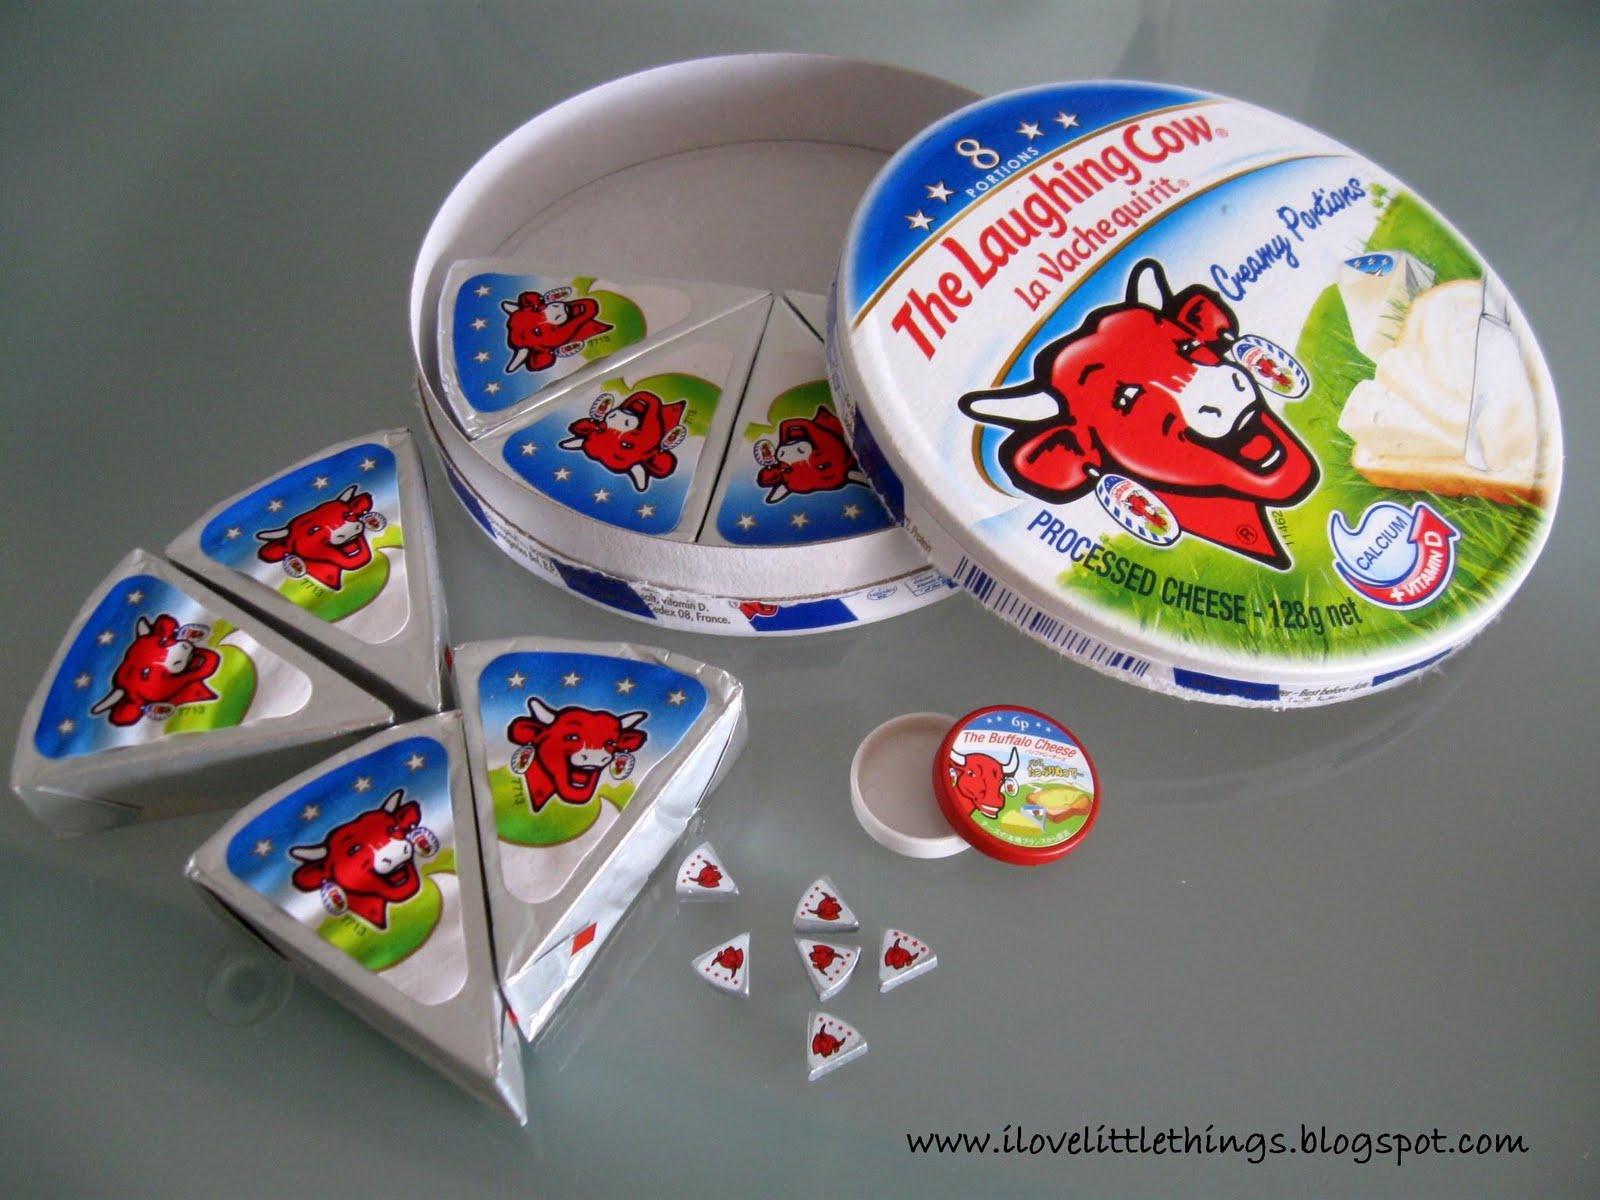 Cow Triangle Logo - Miniatures by I Love Little Things: Re-ment's Laughing Cow